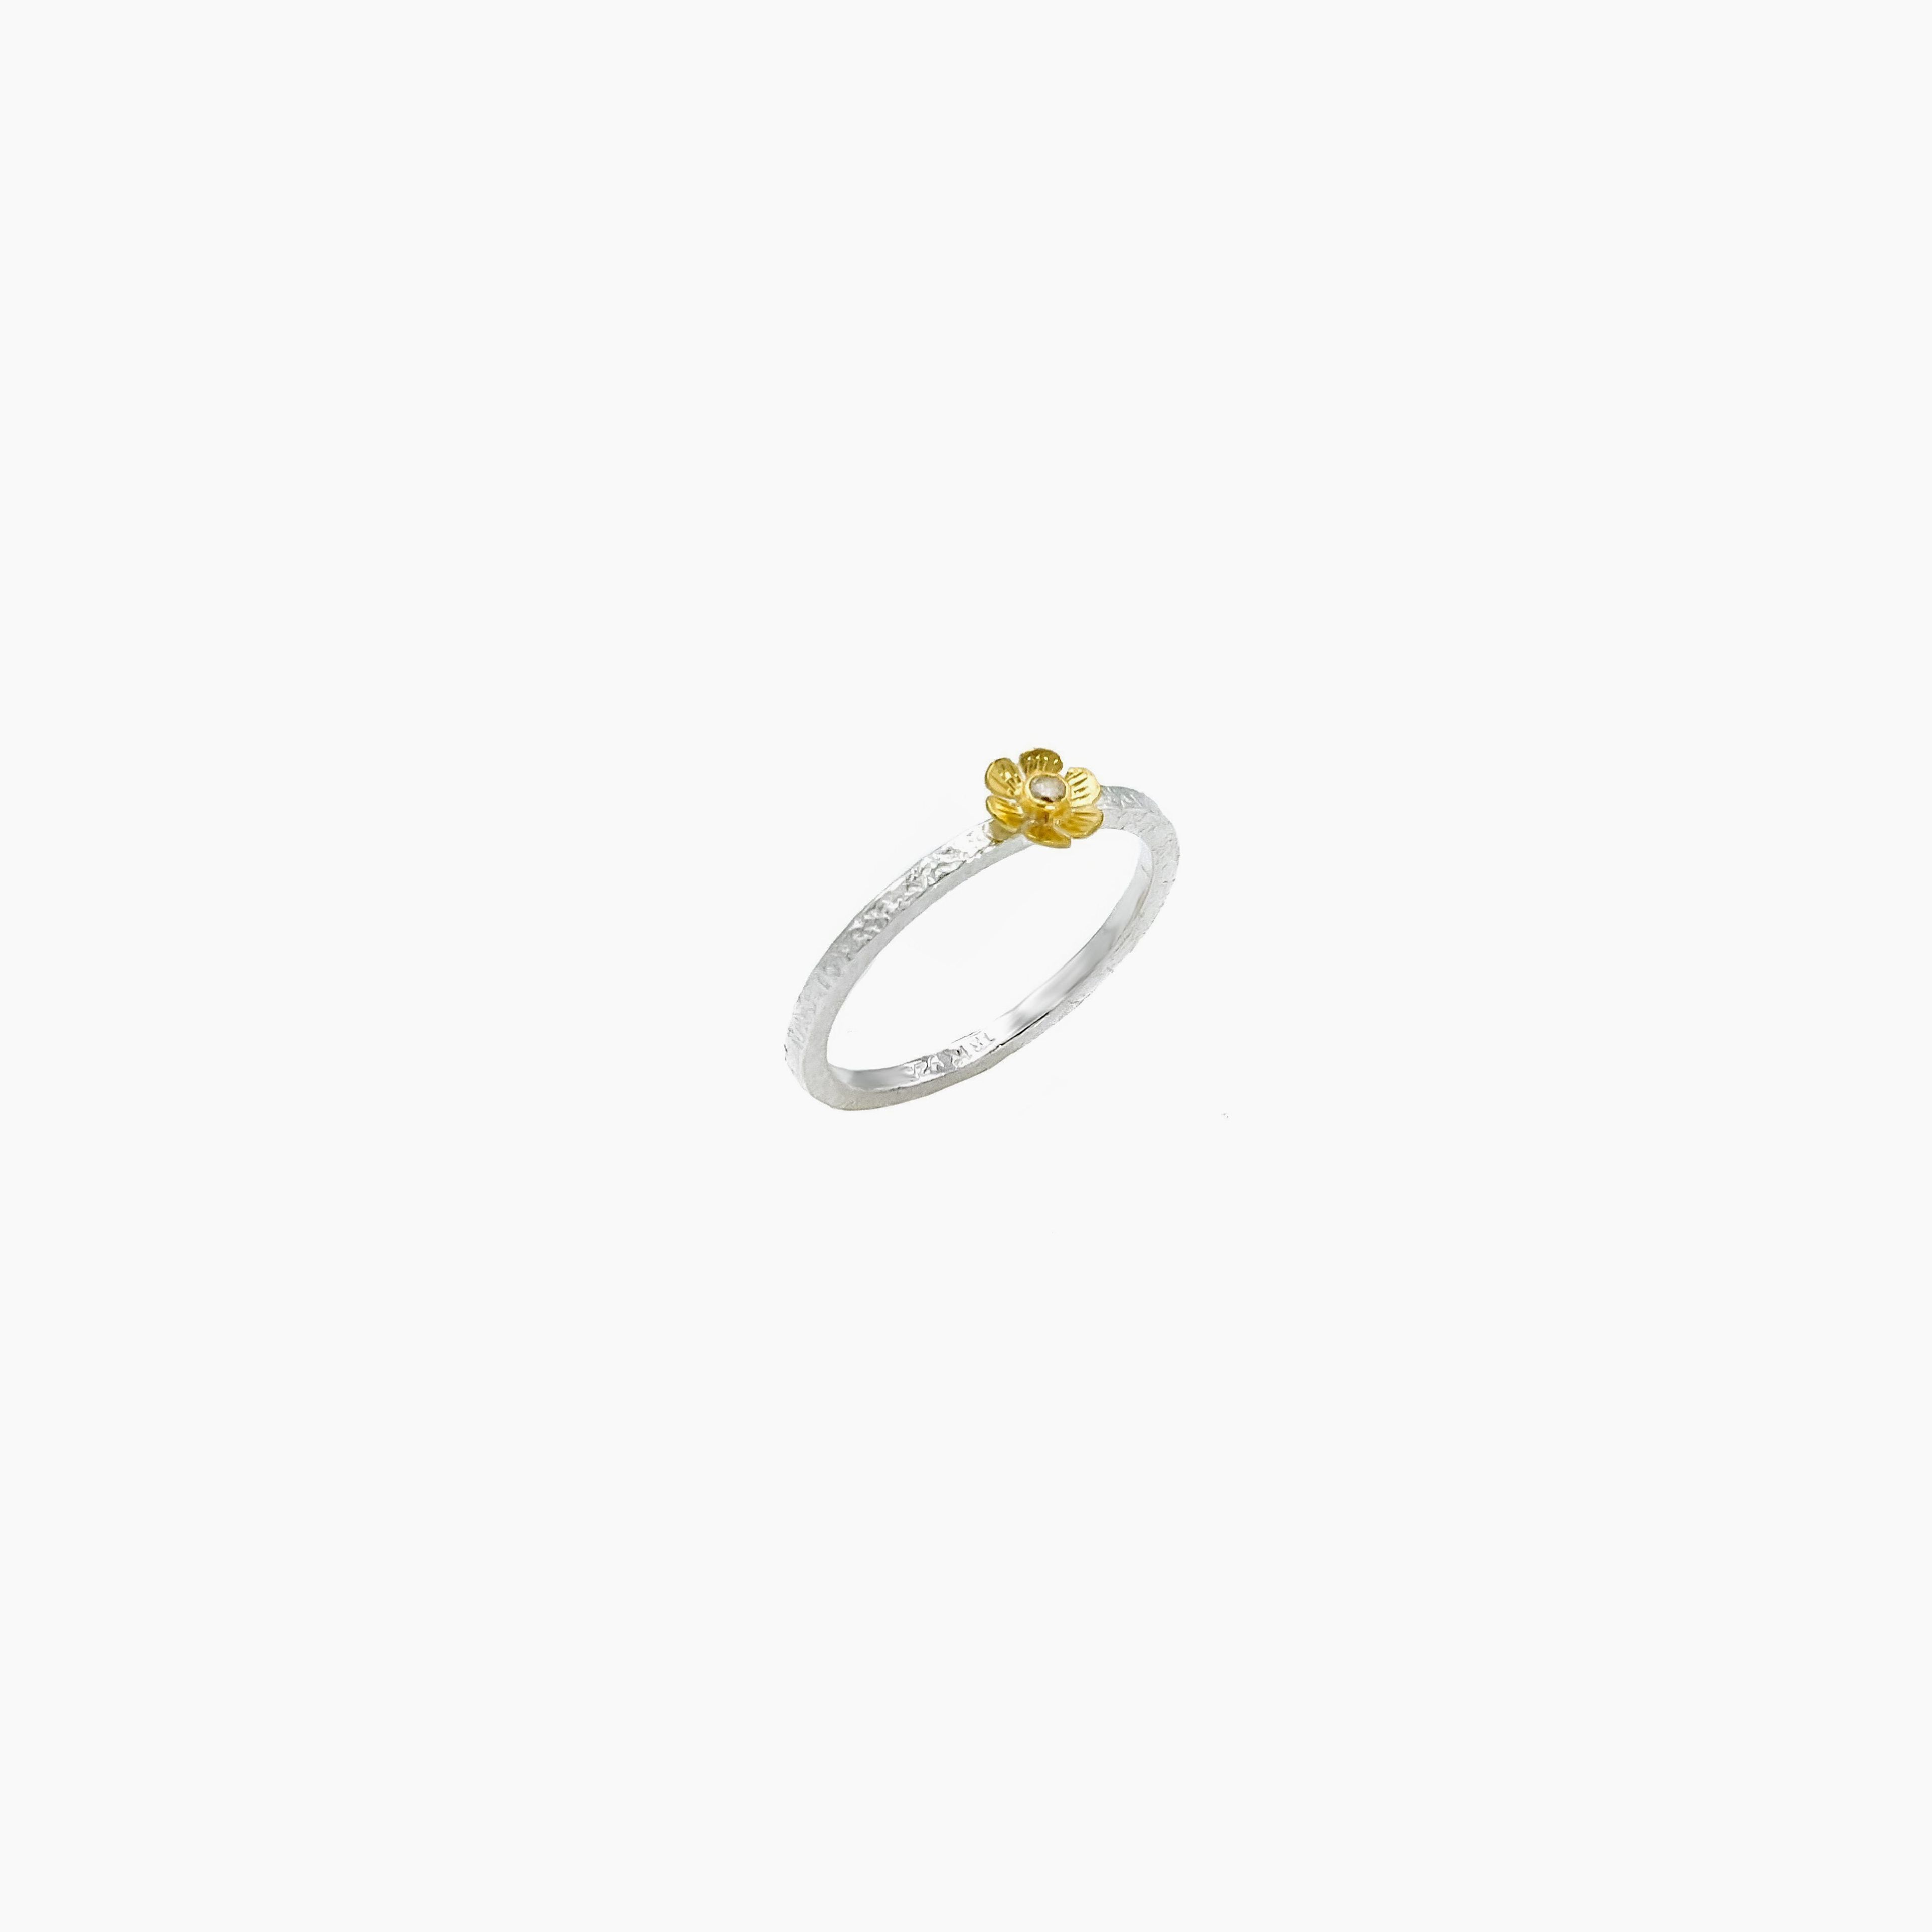 Champagne Diamonds Gold & Silver Flower Ring